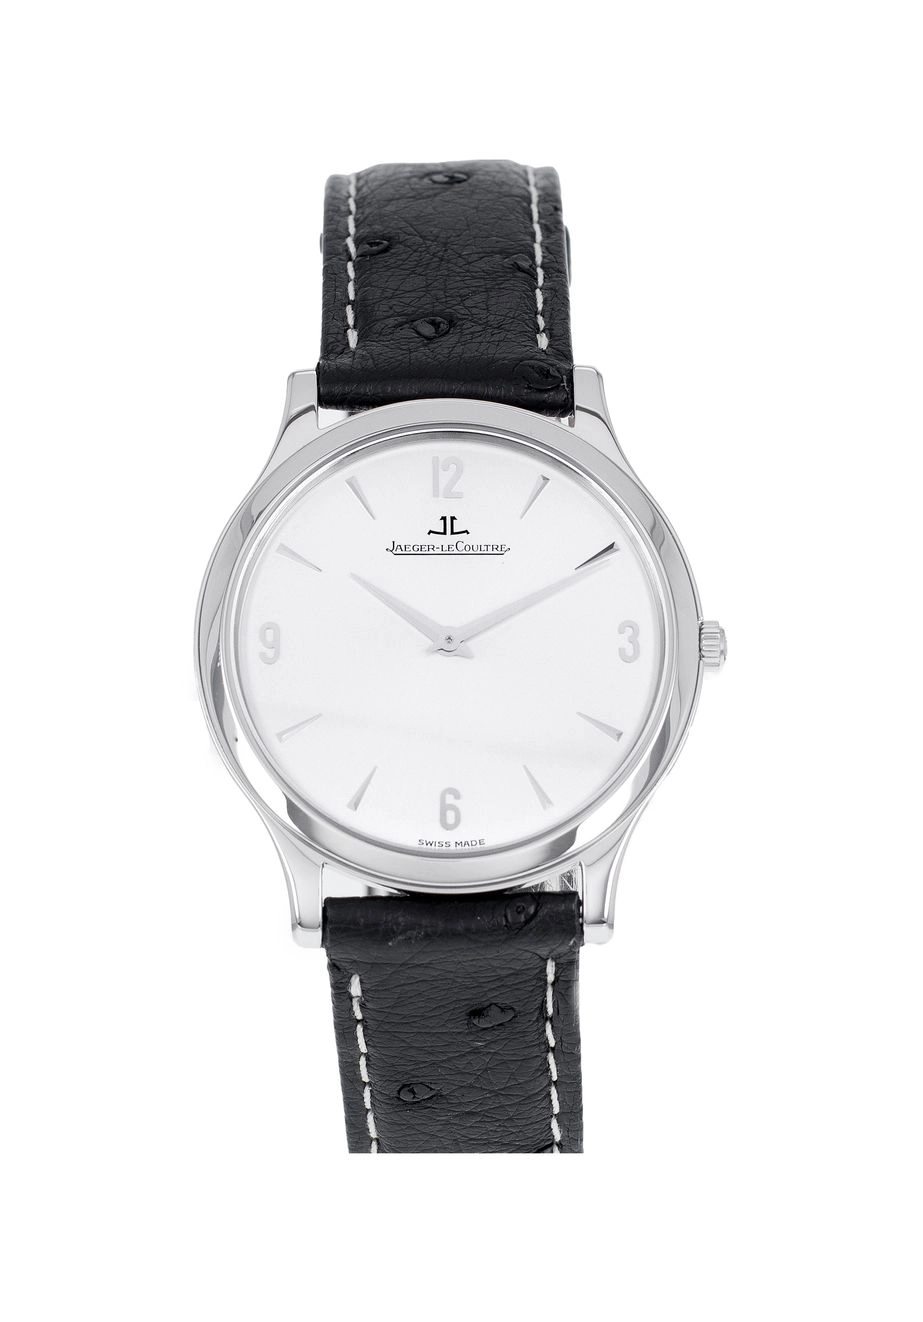 JAEGER - LECOULTRE Master Ultra Thin